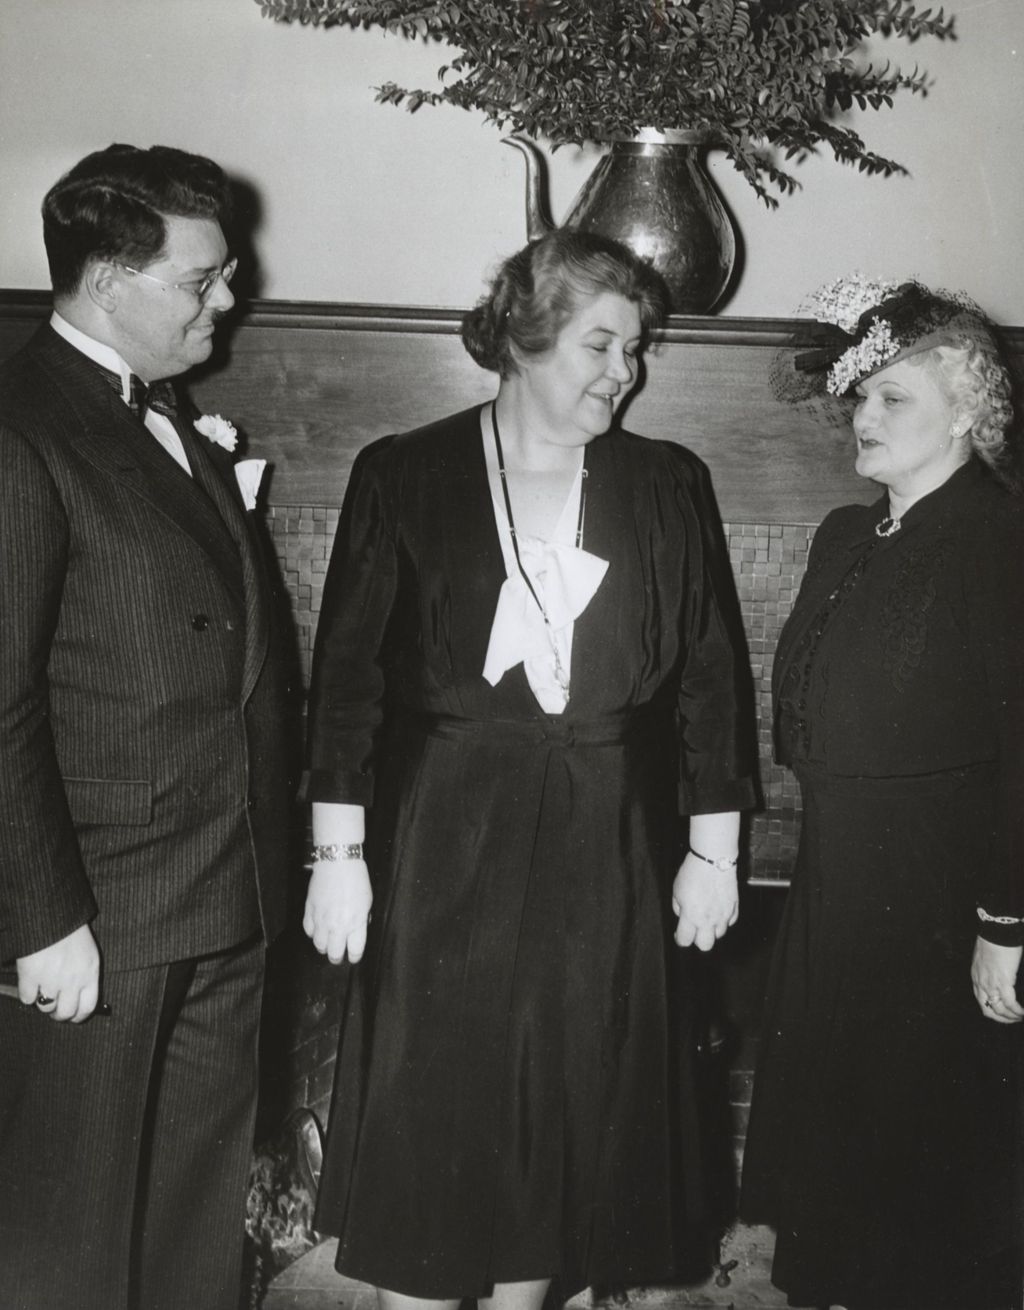 Hull-House director Charlotte Carr with two others